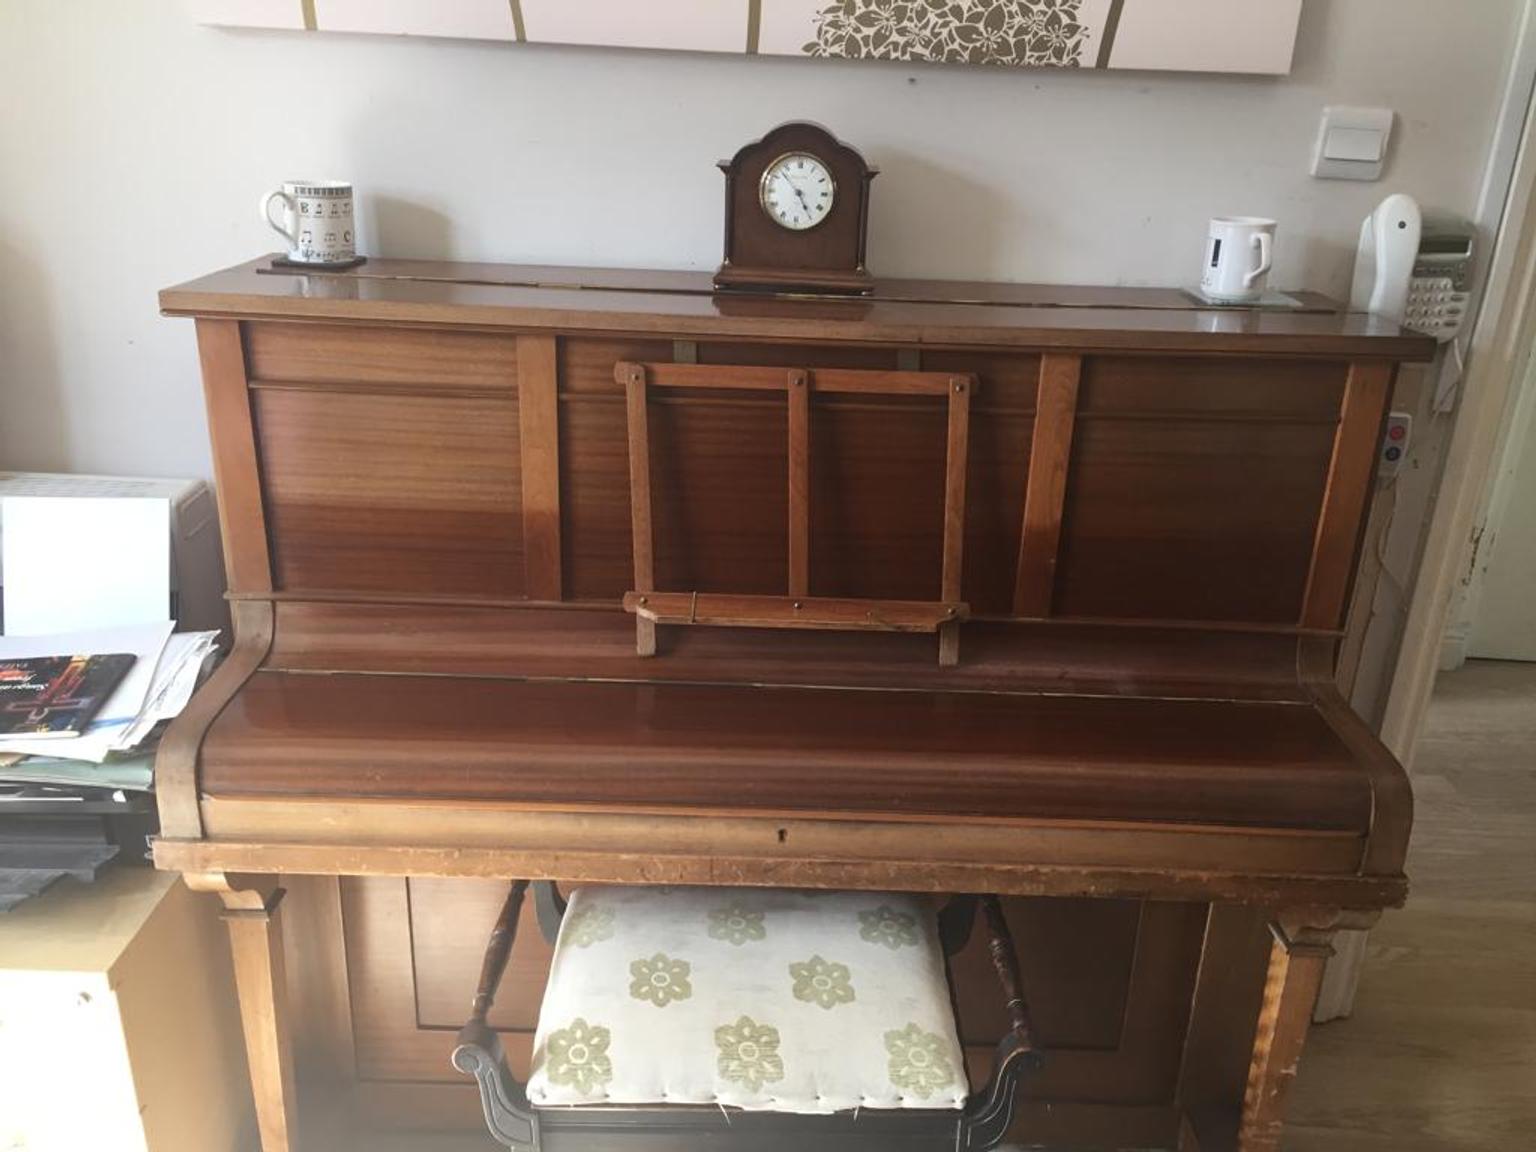 Serma Upright Piano In Nn3 Northampton For 50 00 For Sale Shpock